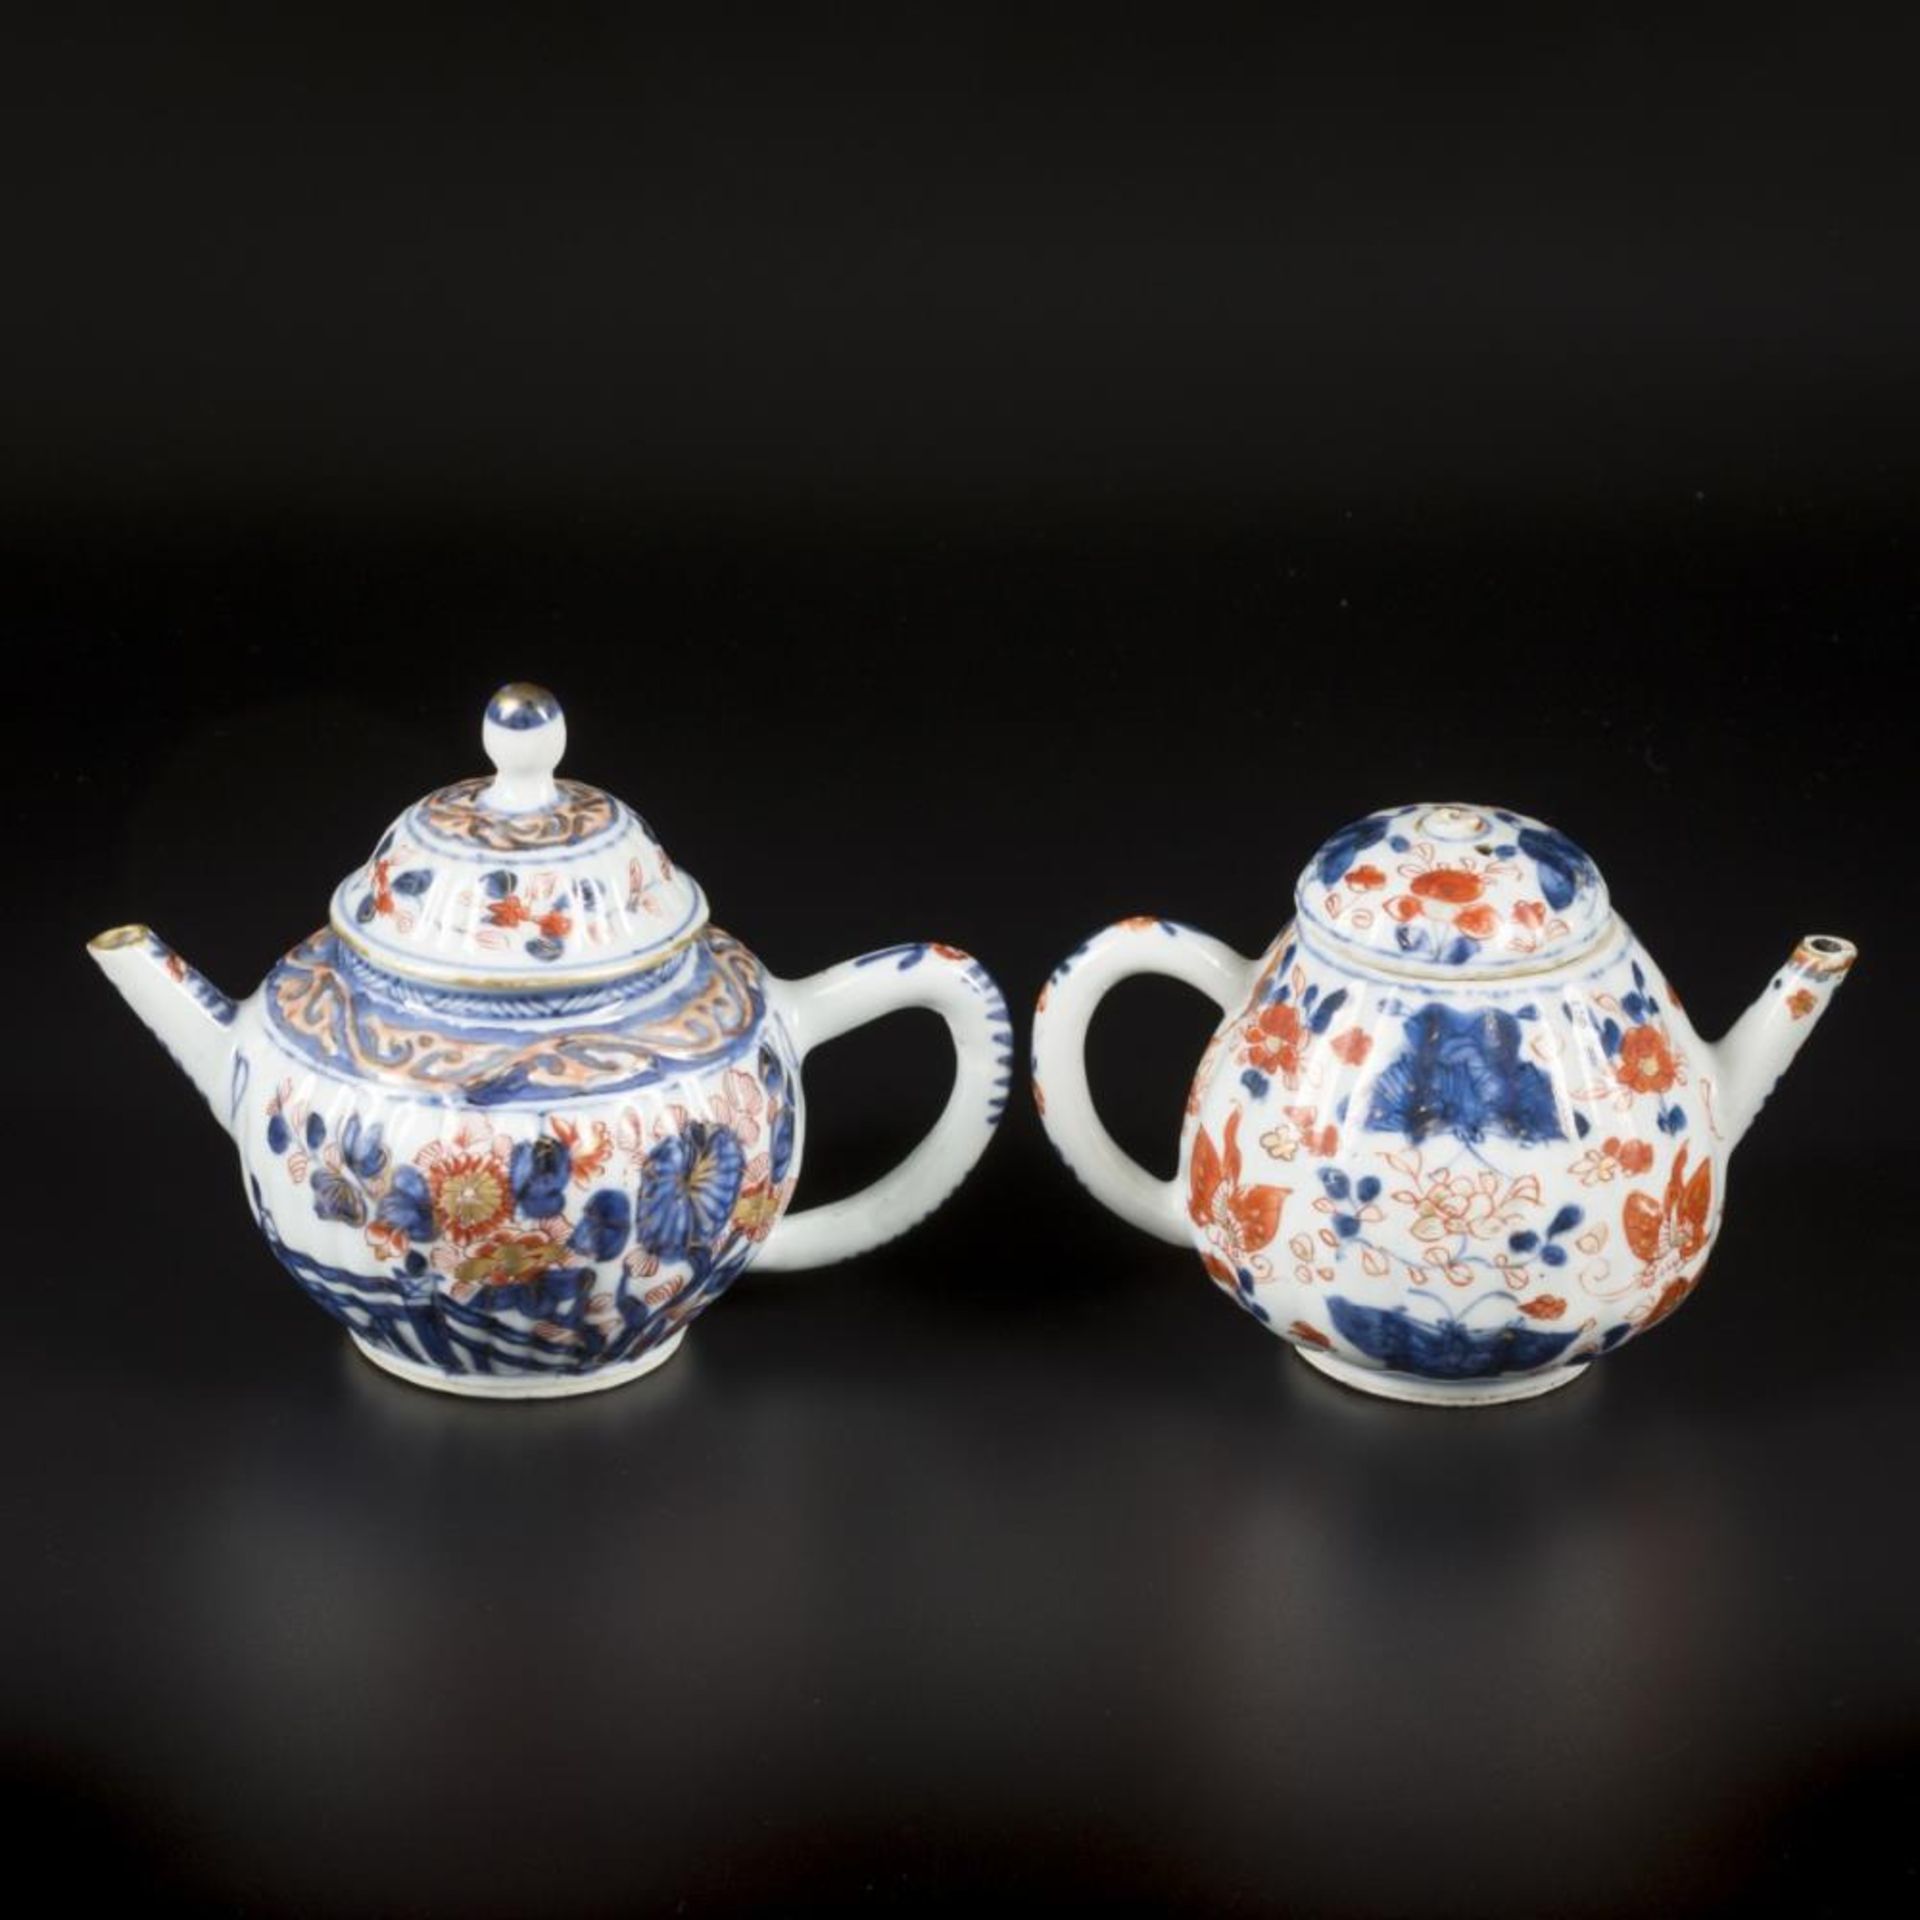 A lot of (2) porcelain teapots with Imari decoration. China, 18th century. - Image 3 of 12